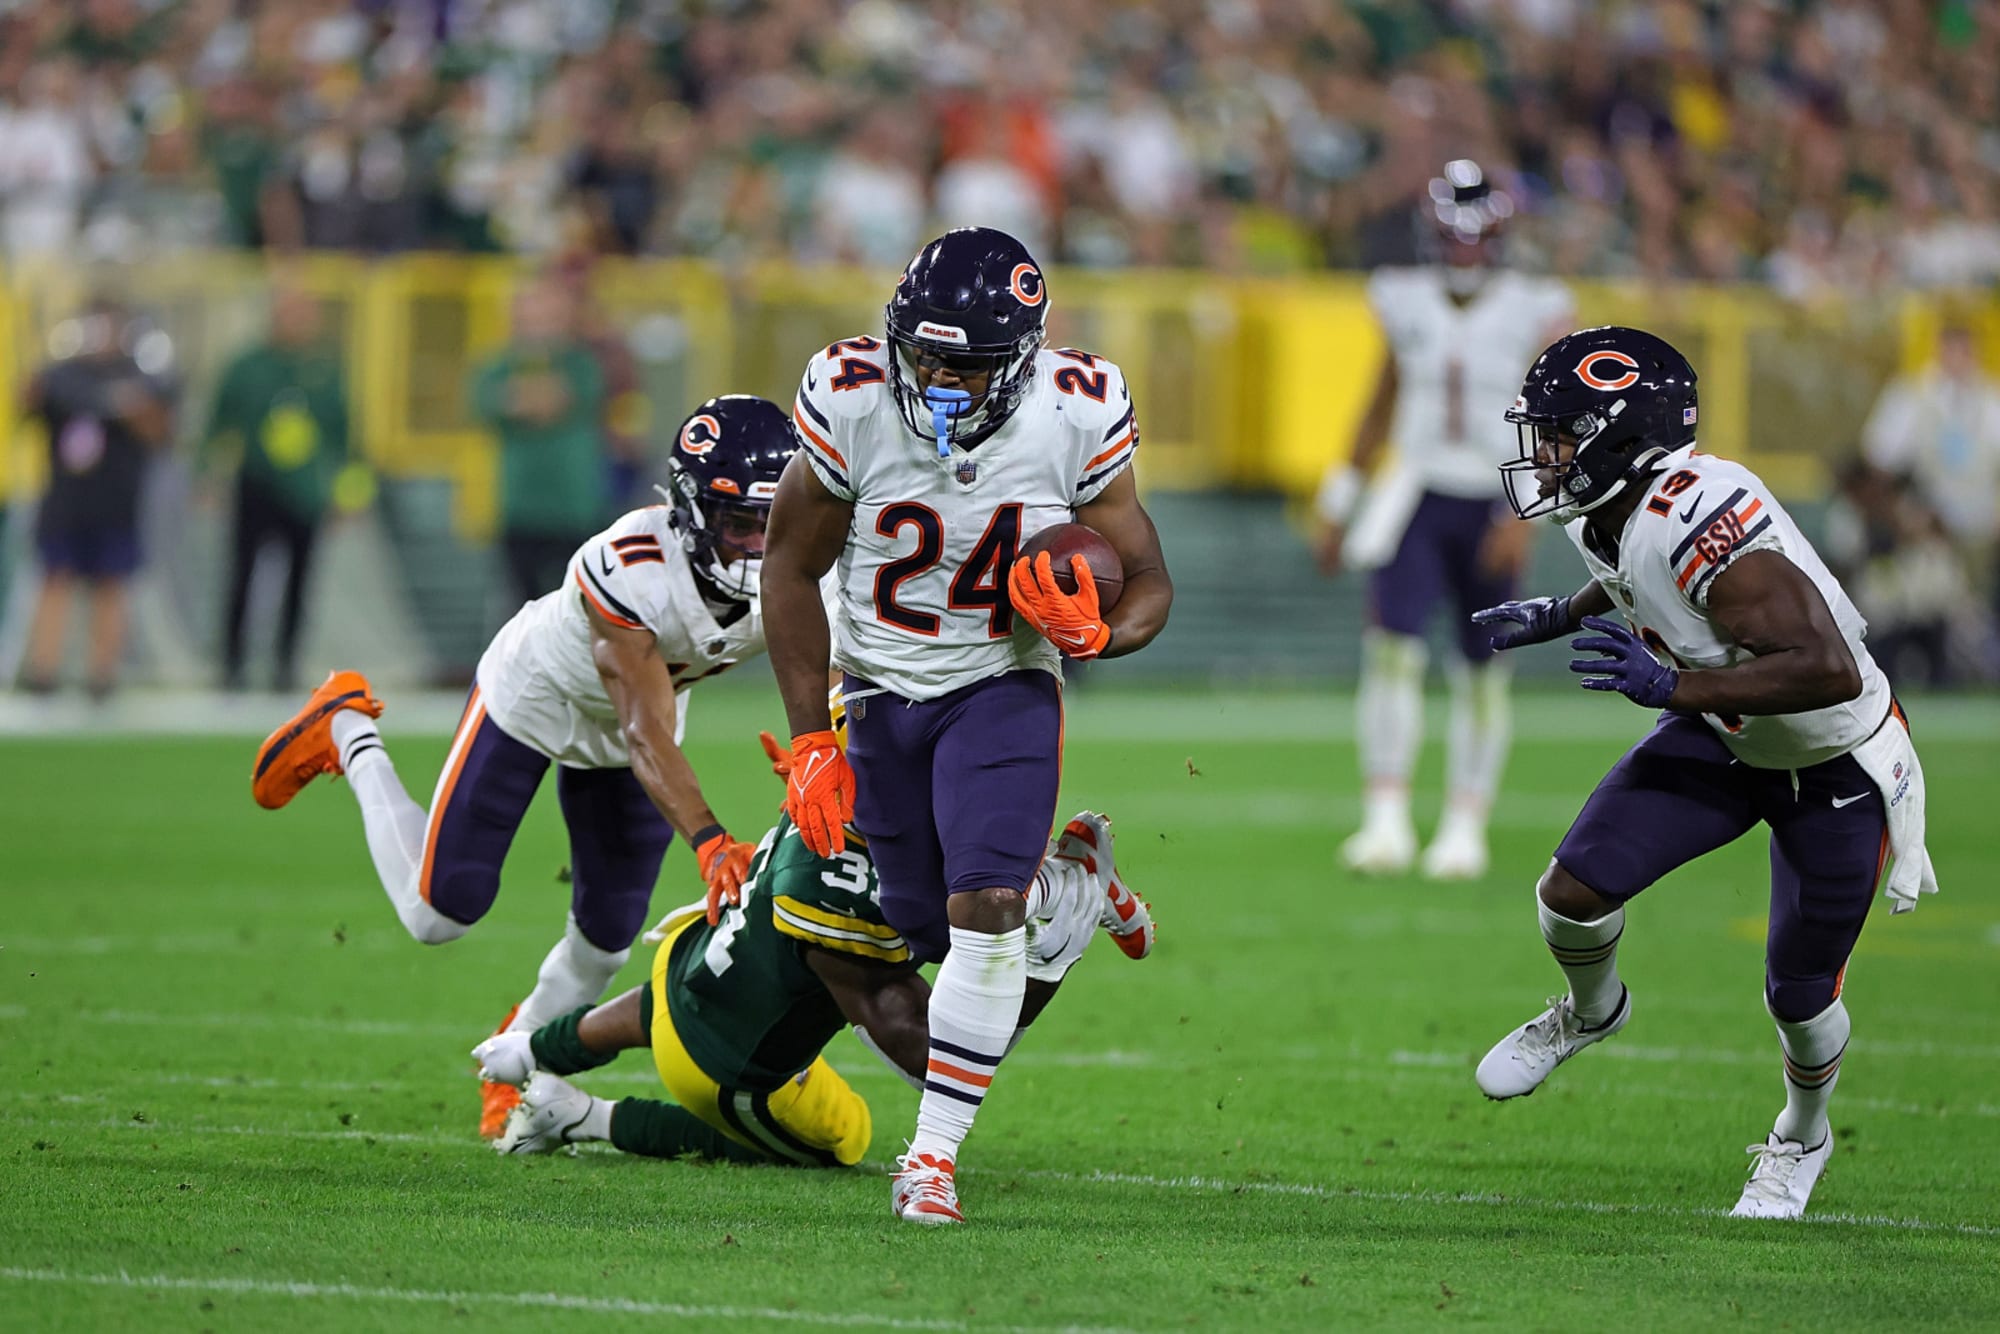 Could Bears end season with better record than Packers?